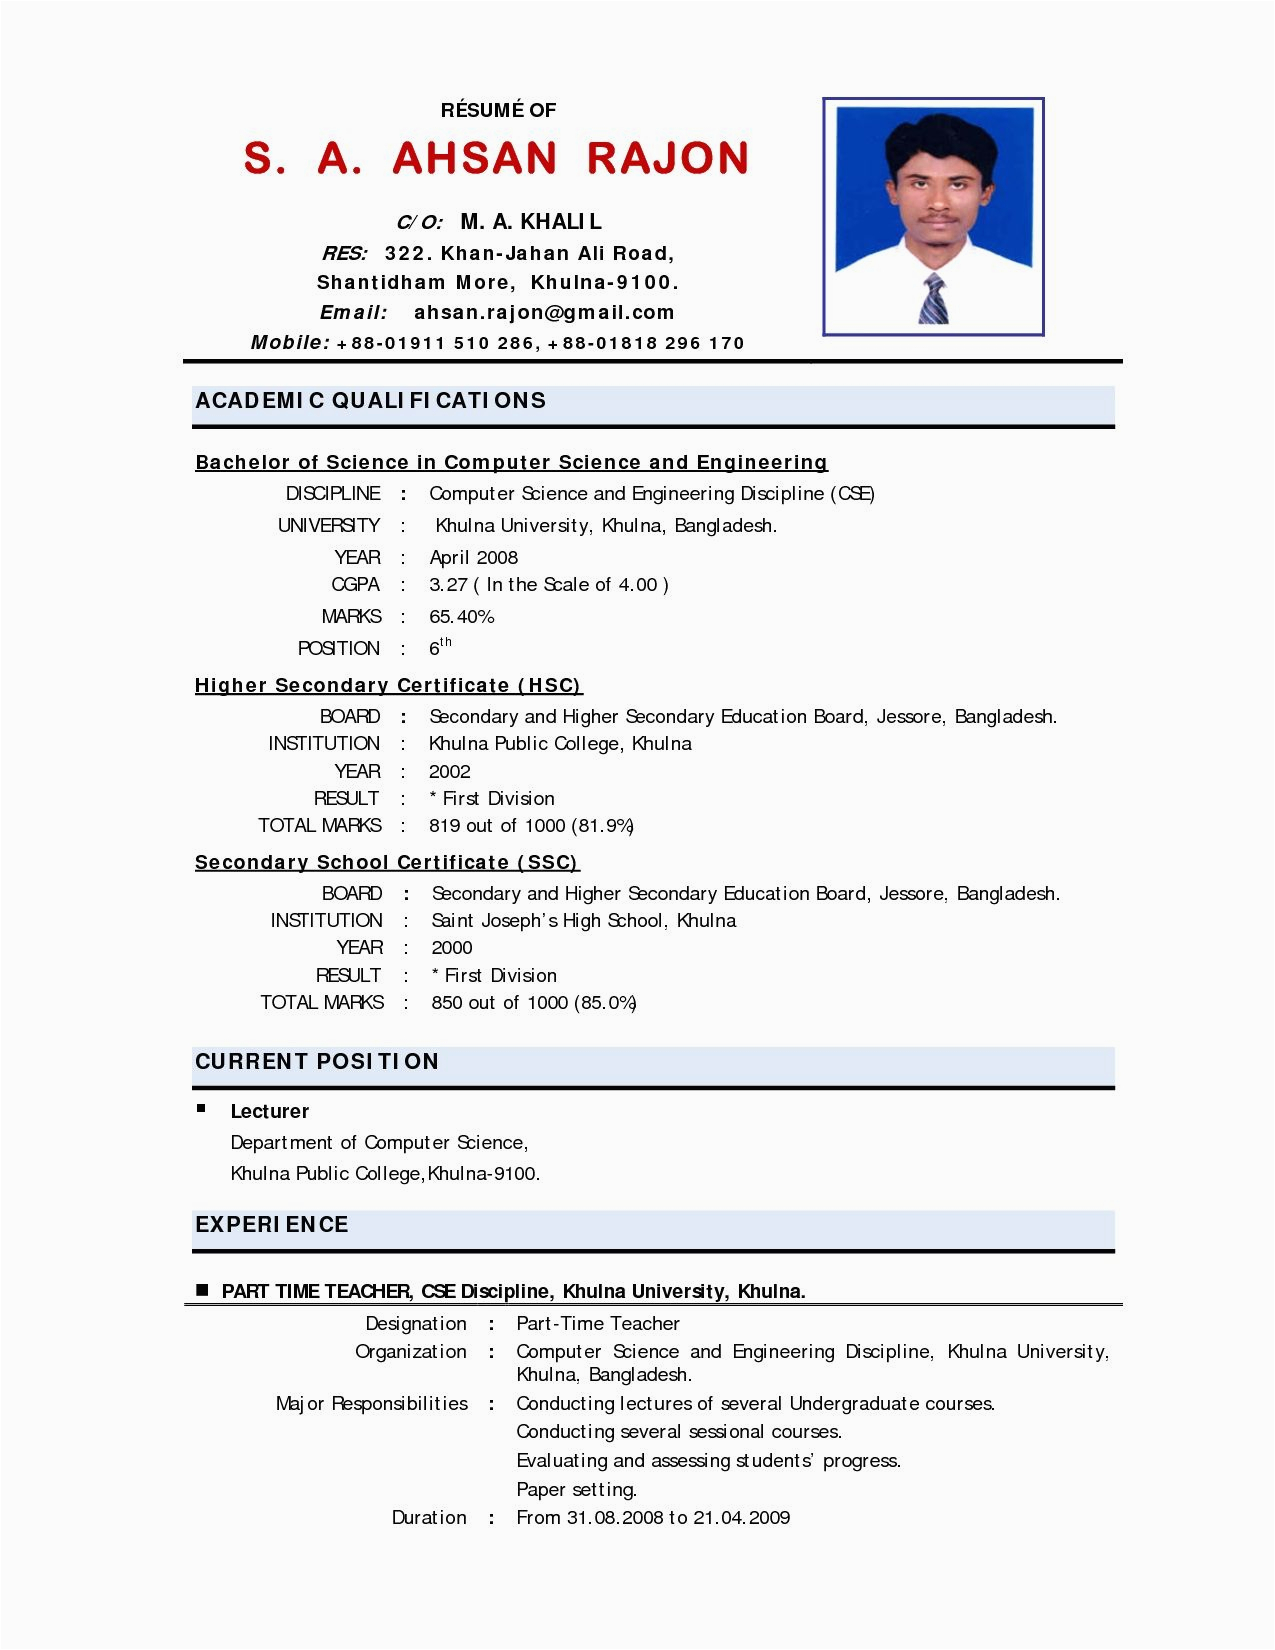 Sample Resume for It Jobs In India Resume format India Resume Templates